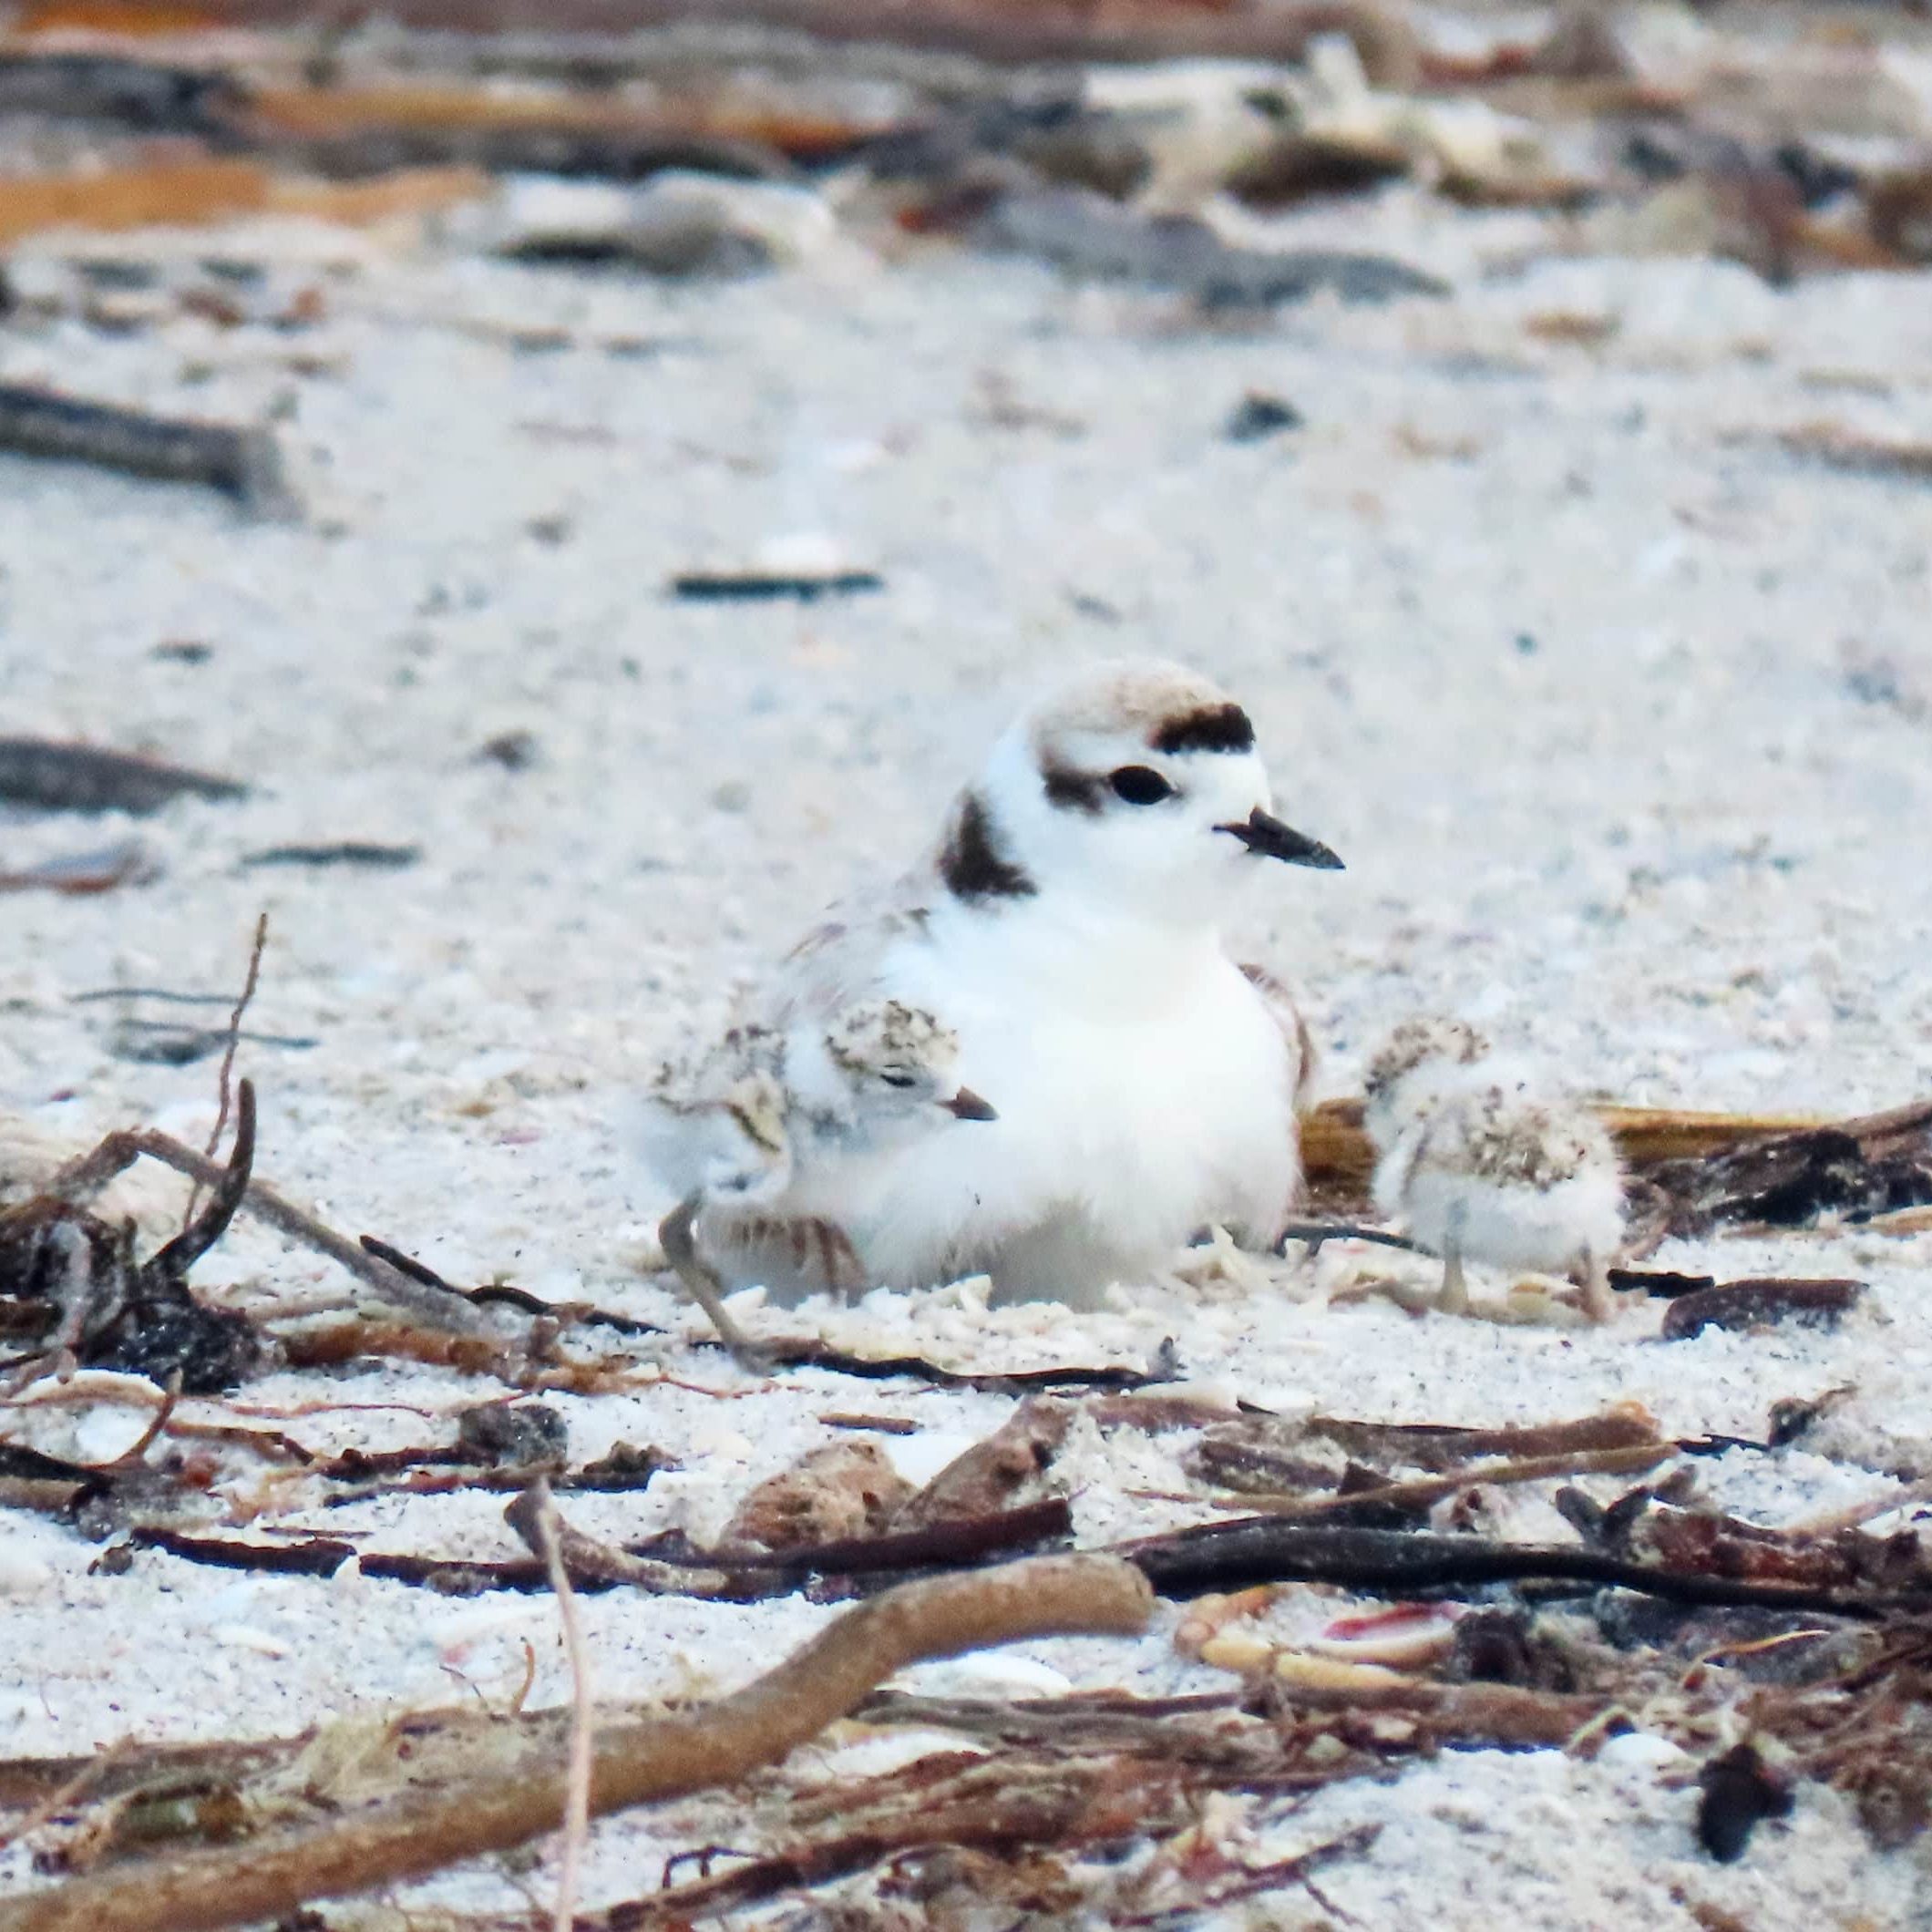 image of snowy plover with two chicks